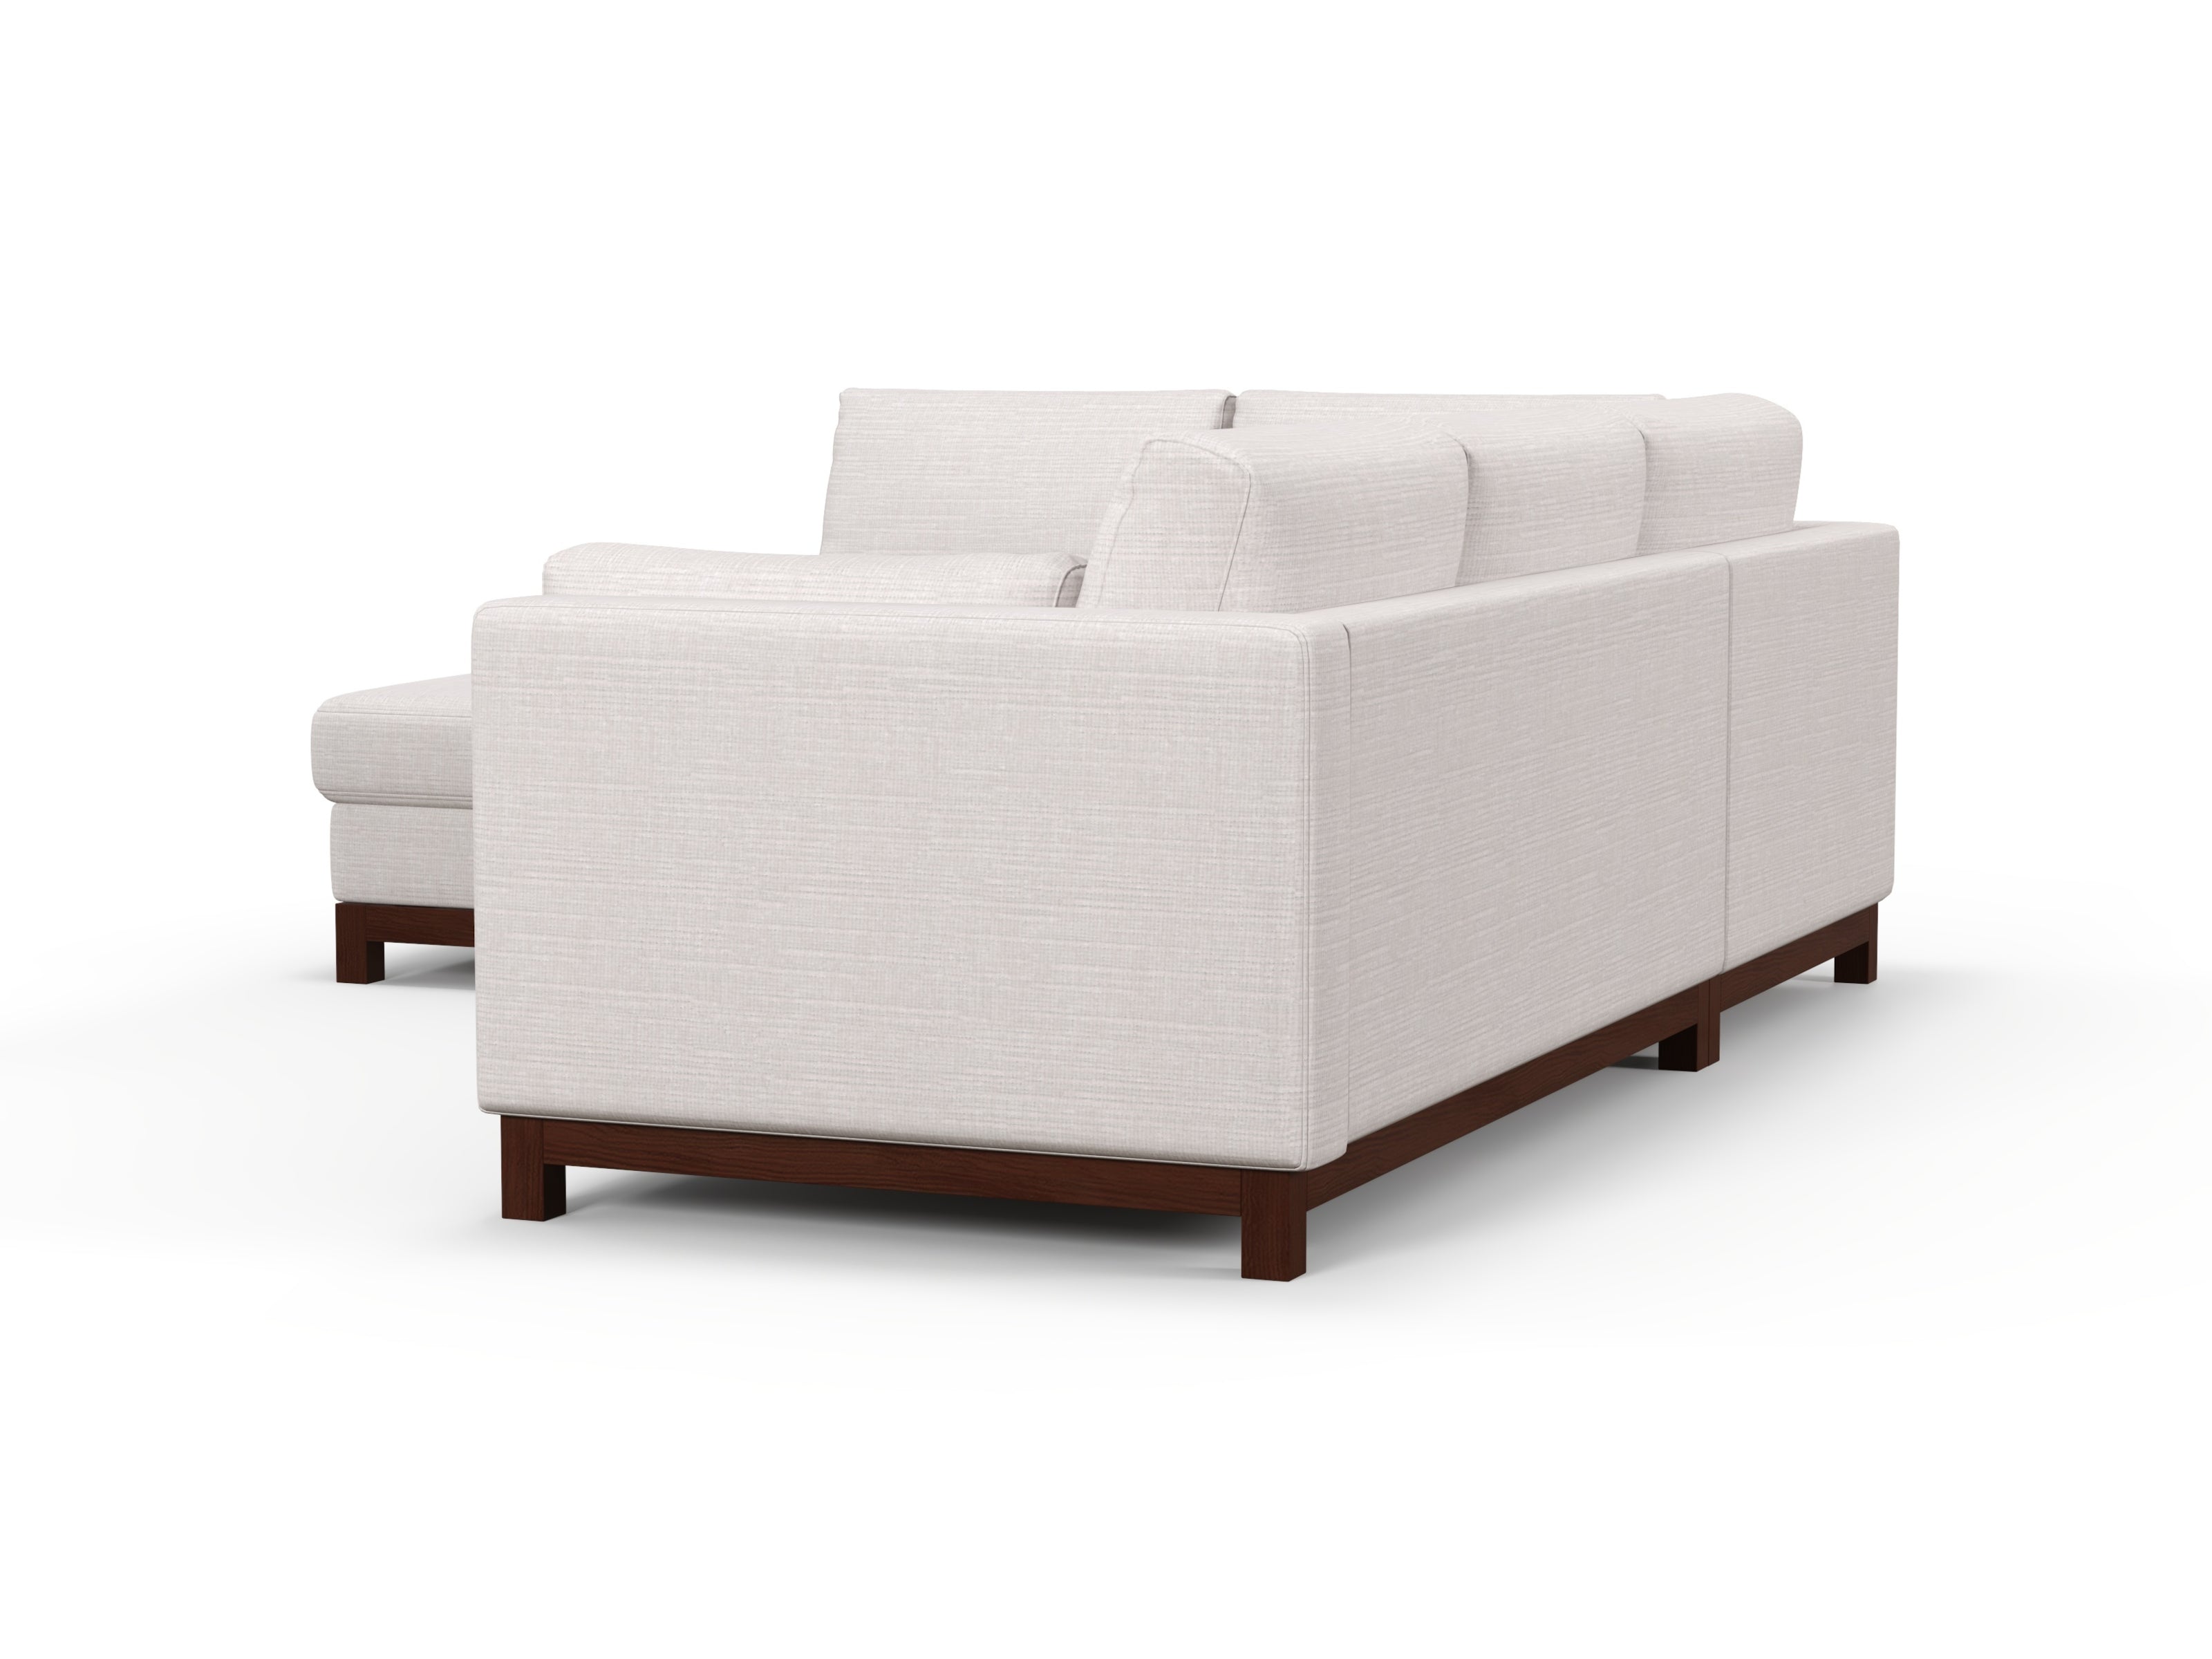 Florida Bumper Chaise Sectional - What A Room